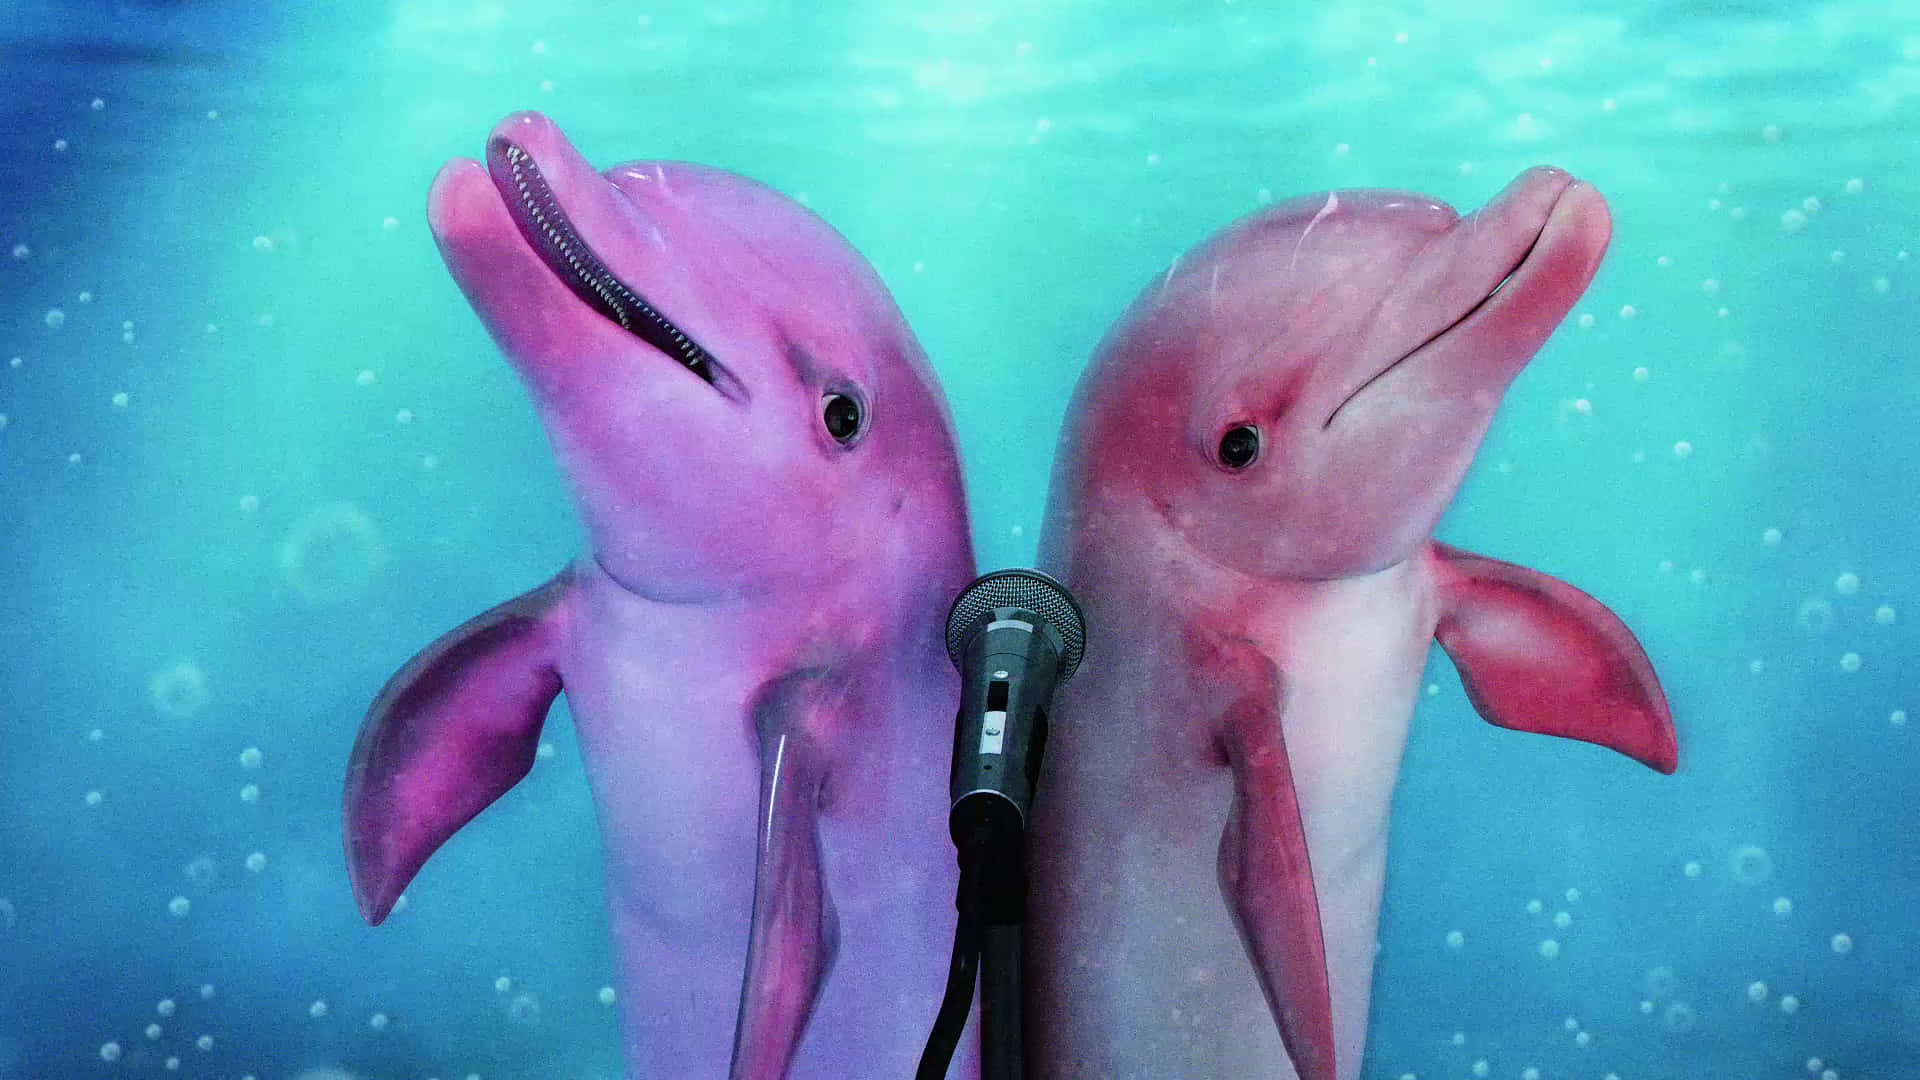 Two Dolphins Are Holding A Microphone In The Water